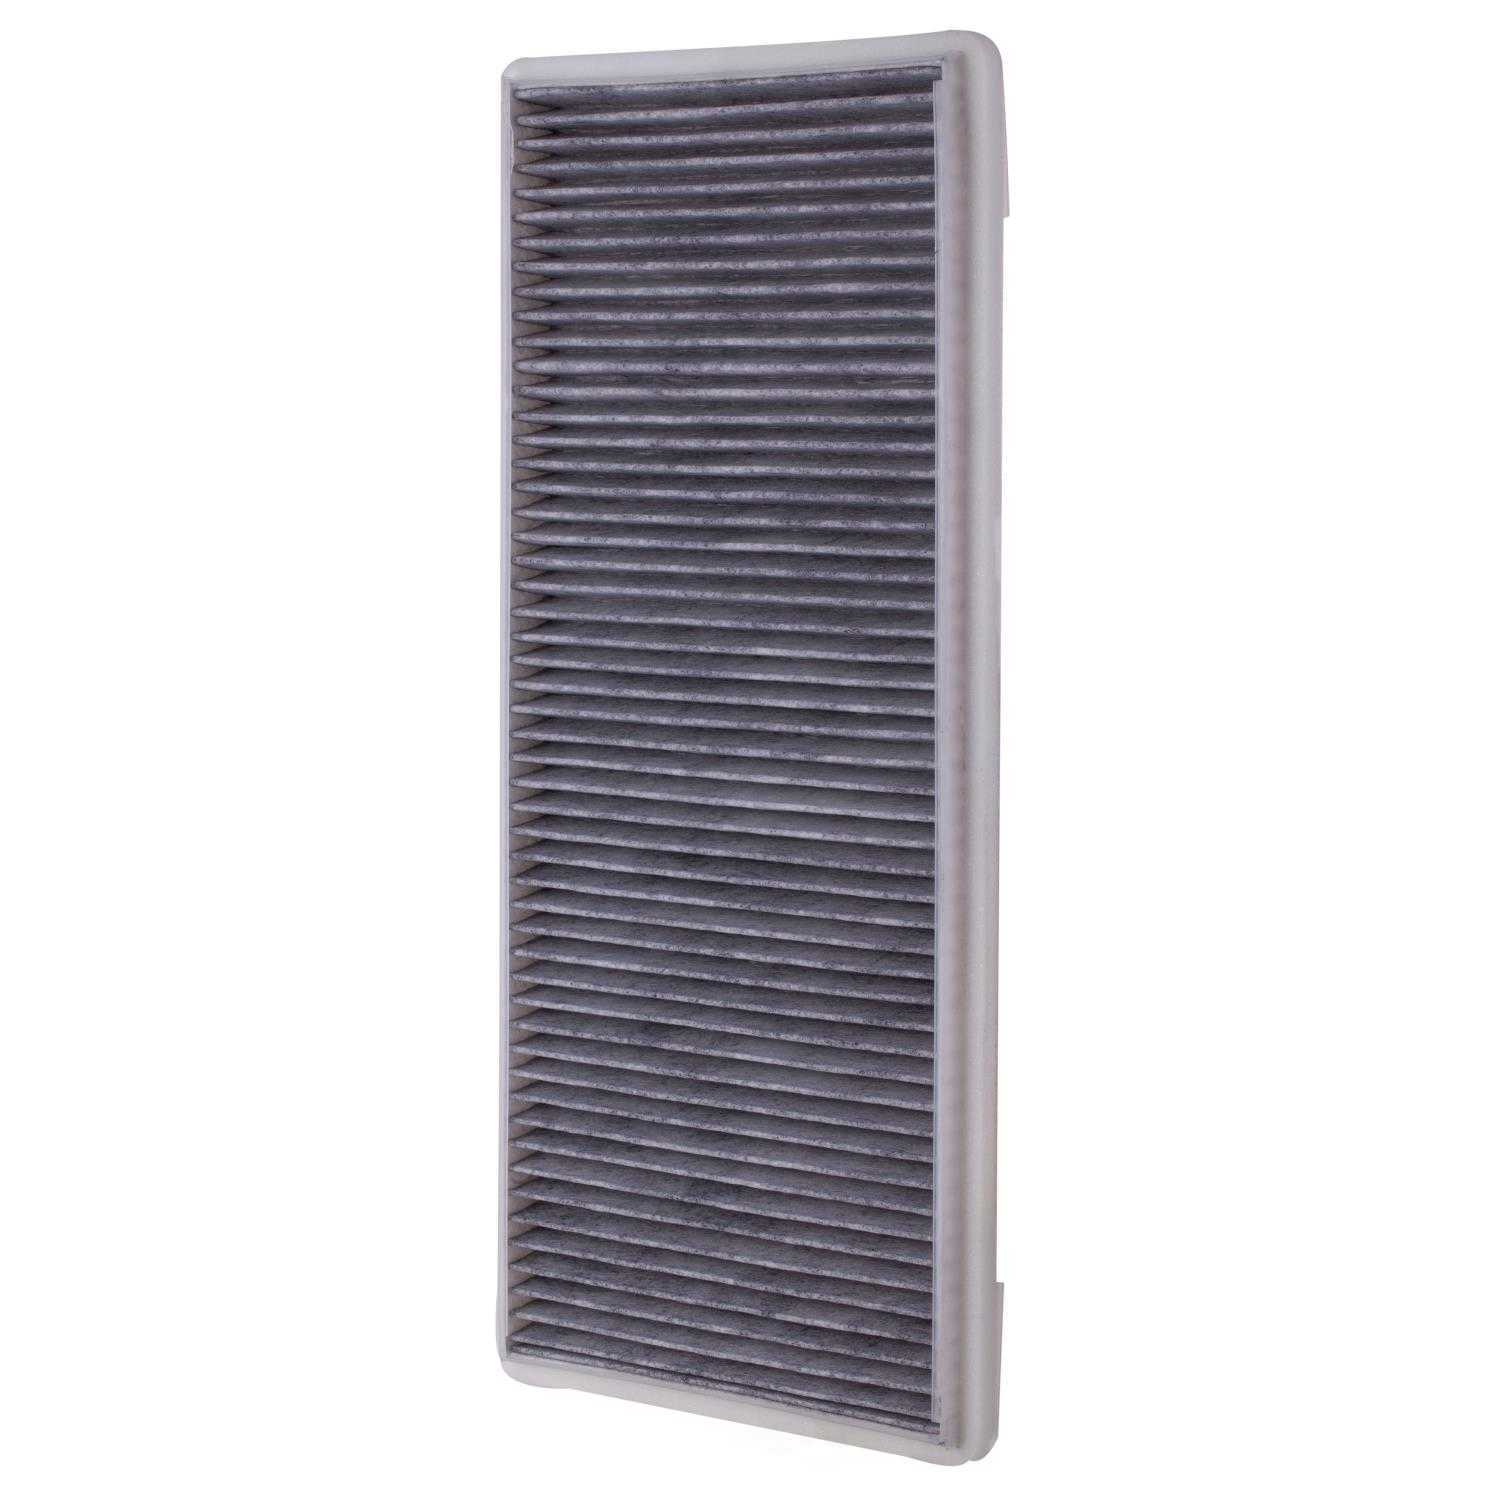 PARTS PLUS FILTERS BY PREMIUM GUARD - Charcoal Media - PLF CAF5637